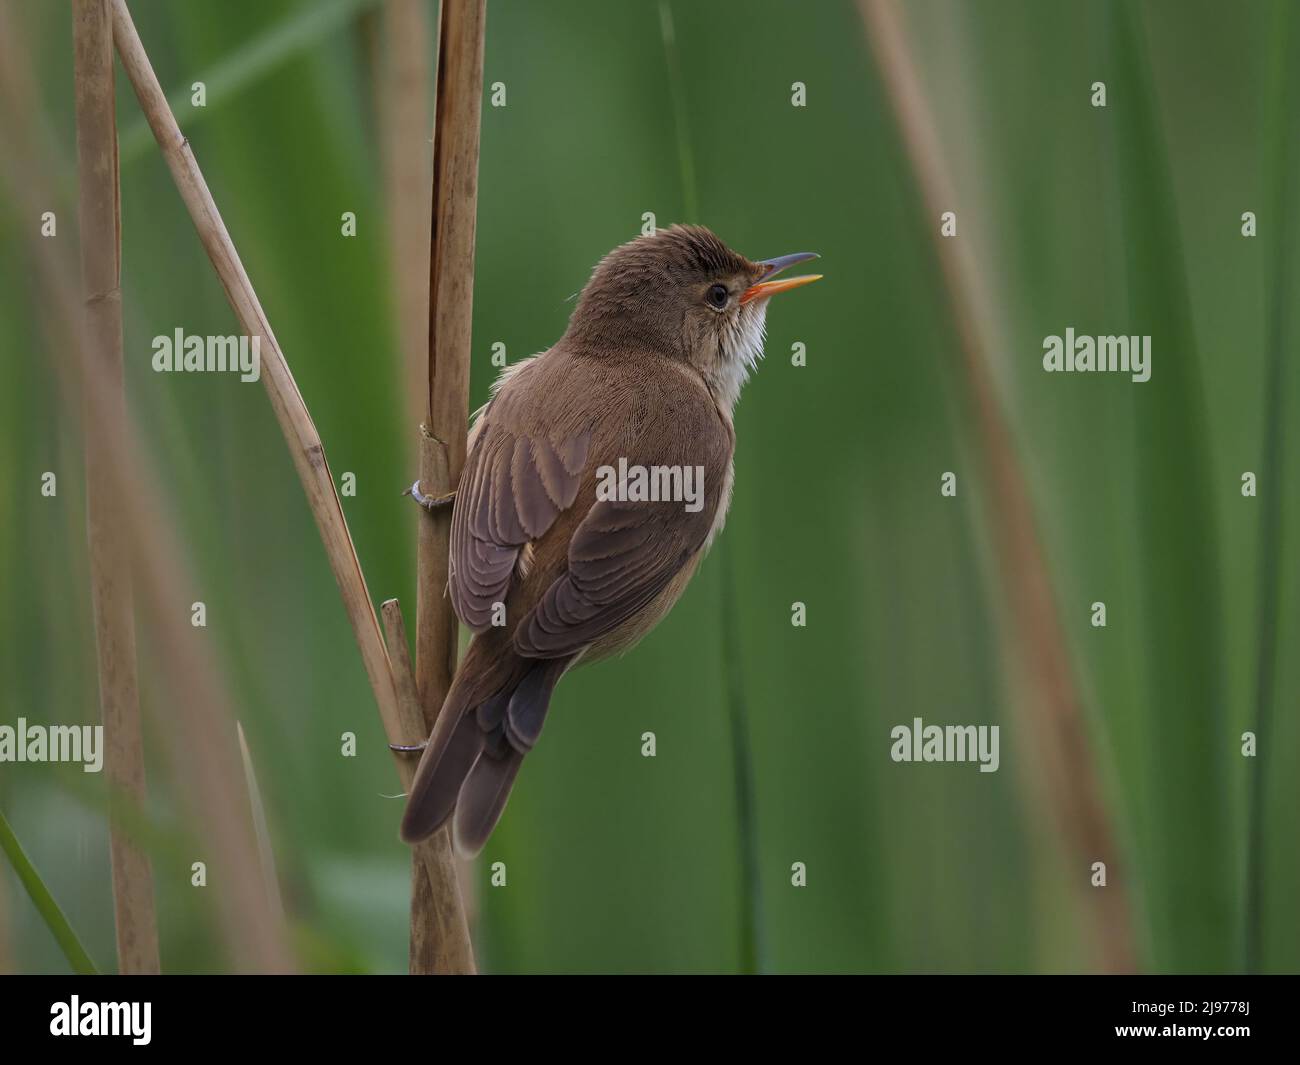 These tiny birds migrate thousands of miles to breed in the UK in our reed beds. Stock Photo